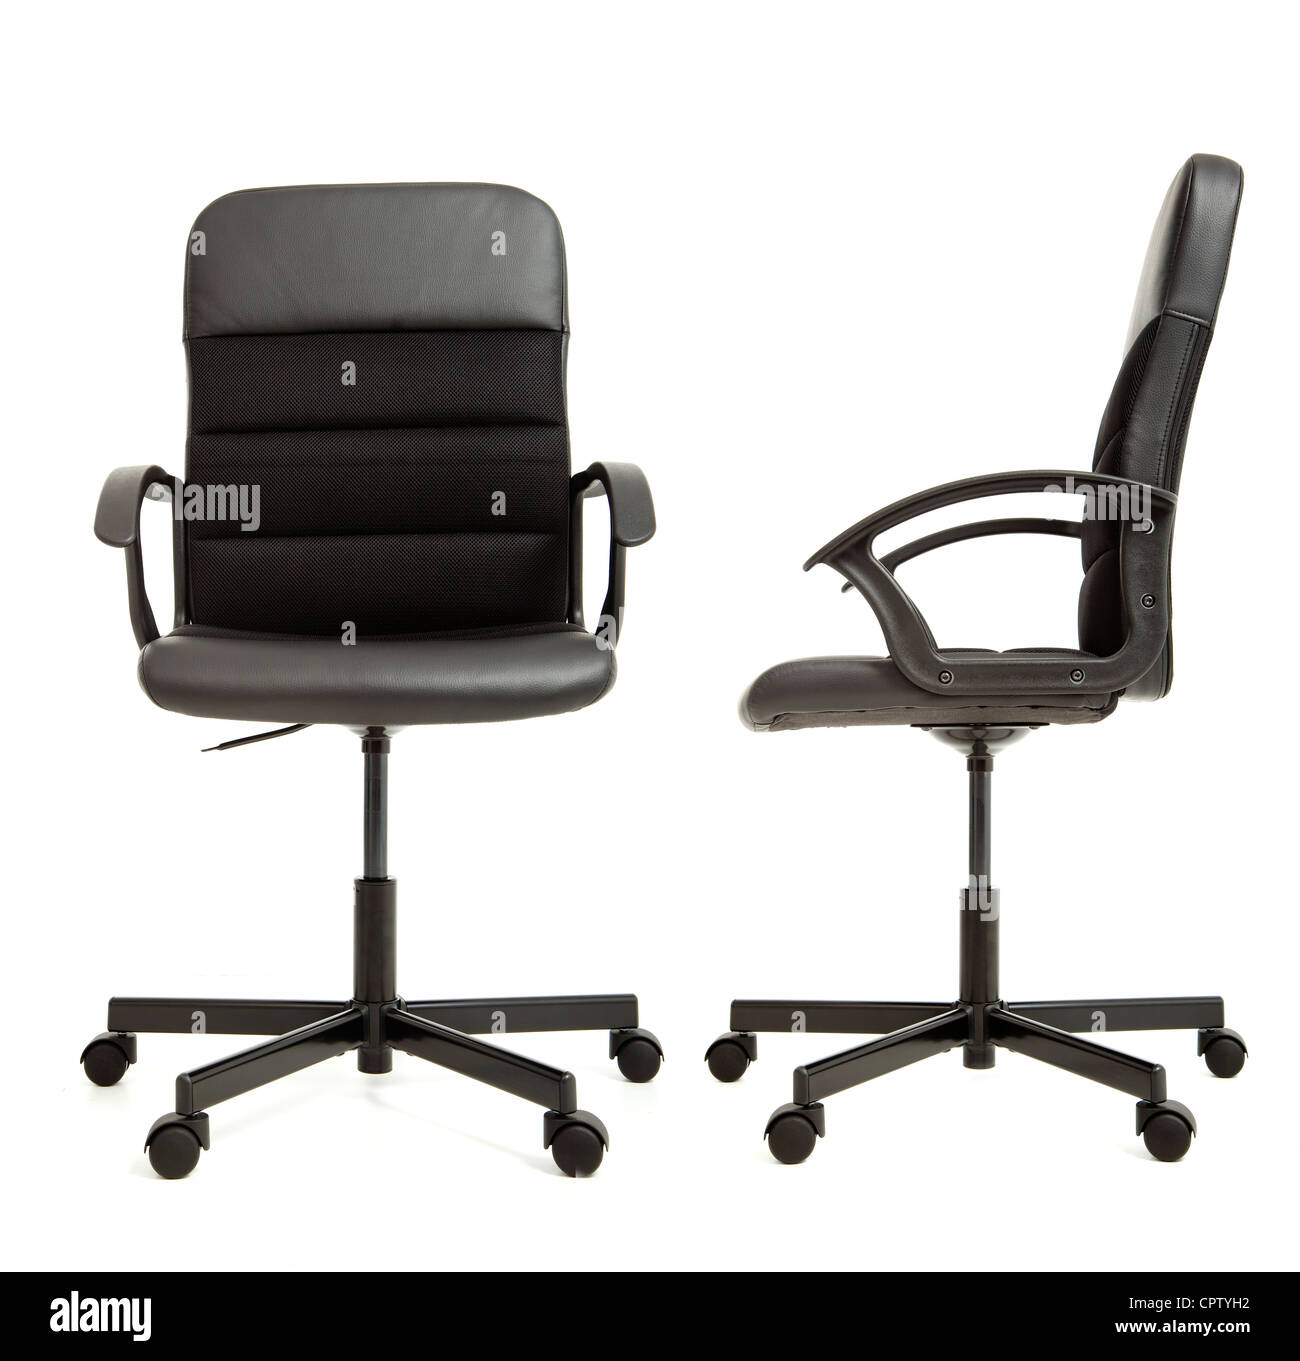 office chair on the white background front and side view Stock Photo - Alamy